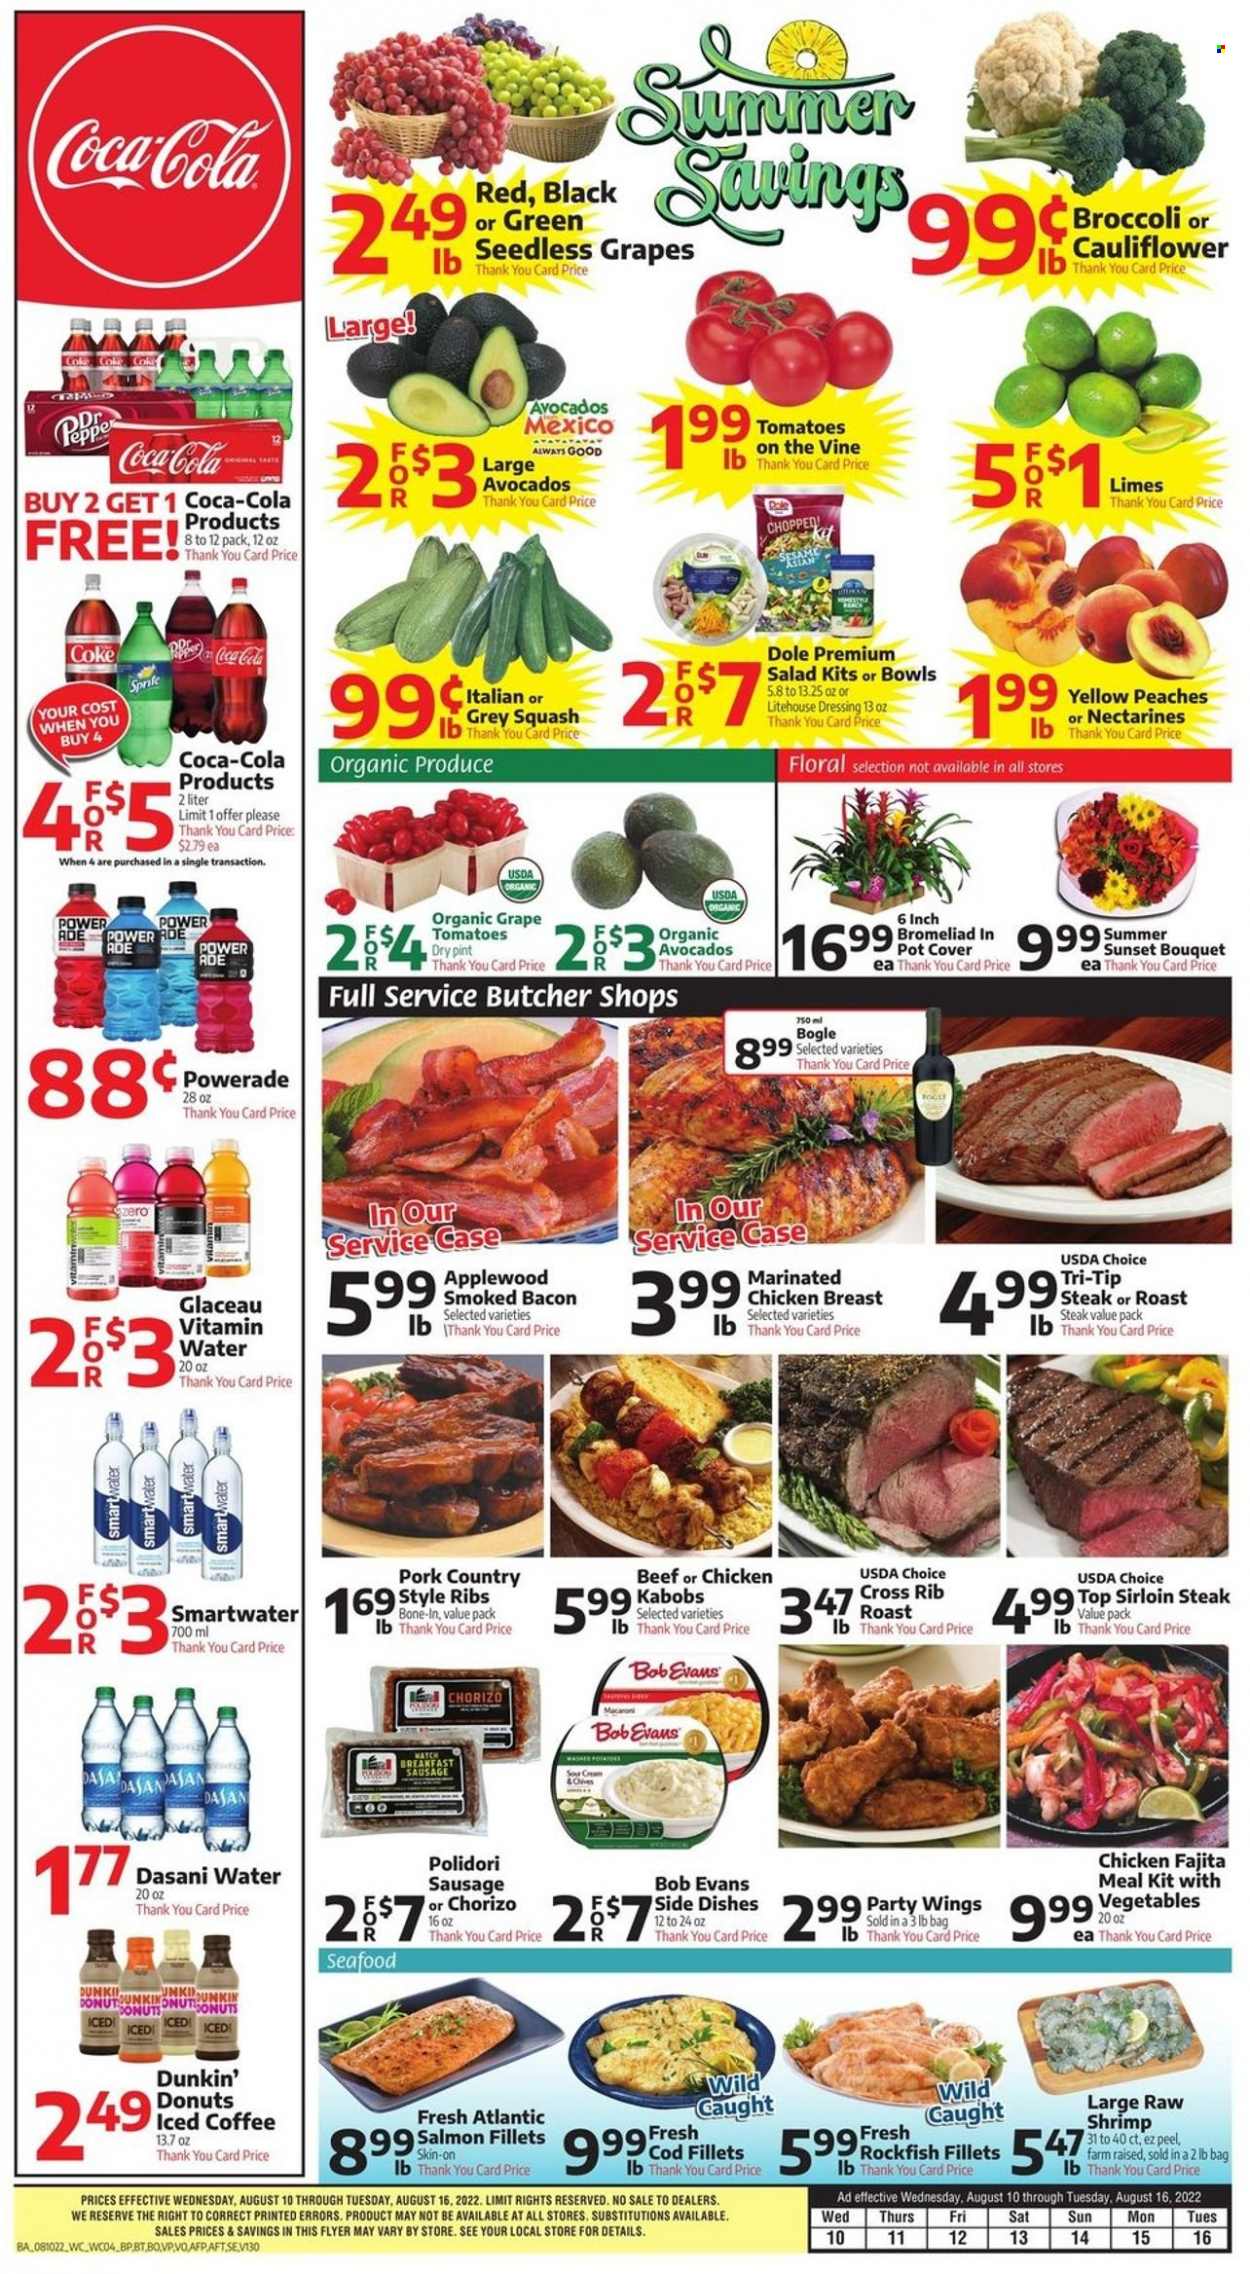 thumbnail - Bashas' Flyer - 08/10/2022 - 08/16/2022 - Sales products - donut, Dunkin' Donuts, broccoli, cauliflower, tomatoes, salad, Dole, avocado, limes, seedless grapes, cod, rockfish, salmon, salmon fillet, seafood, shrimps, macaroni, fajita, Bob Evans, bacon, chorizo, sausage, sour cream, dressing, Coca-Cola, Sprite, Powerade, Smartwater, vitamin water, iced coffee, chicken breasts, marinated chicken, beef sirloin, steak, sirloin steak, pork ribs, country style ribs, pot, bouquet, nectarines, peaches. Page 4.